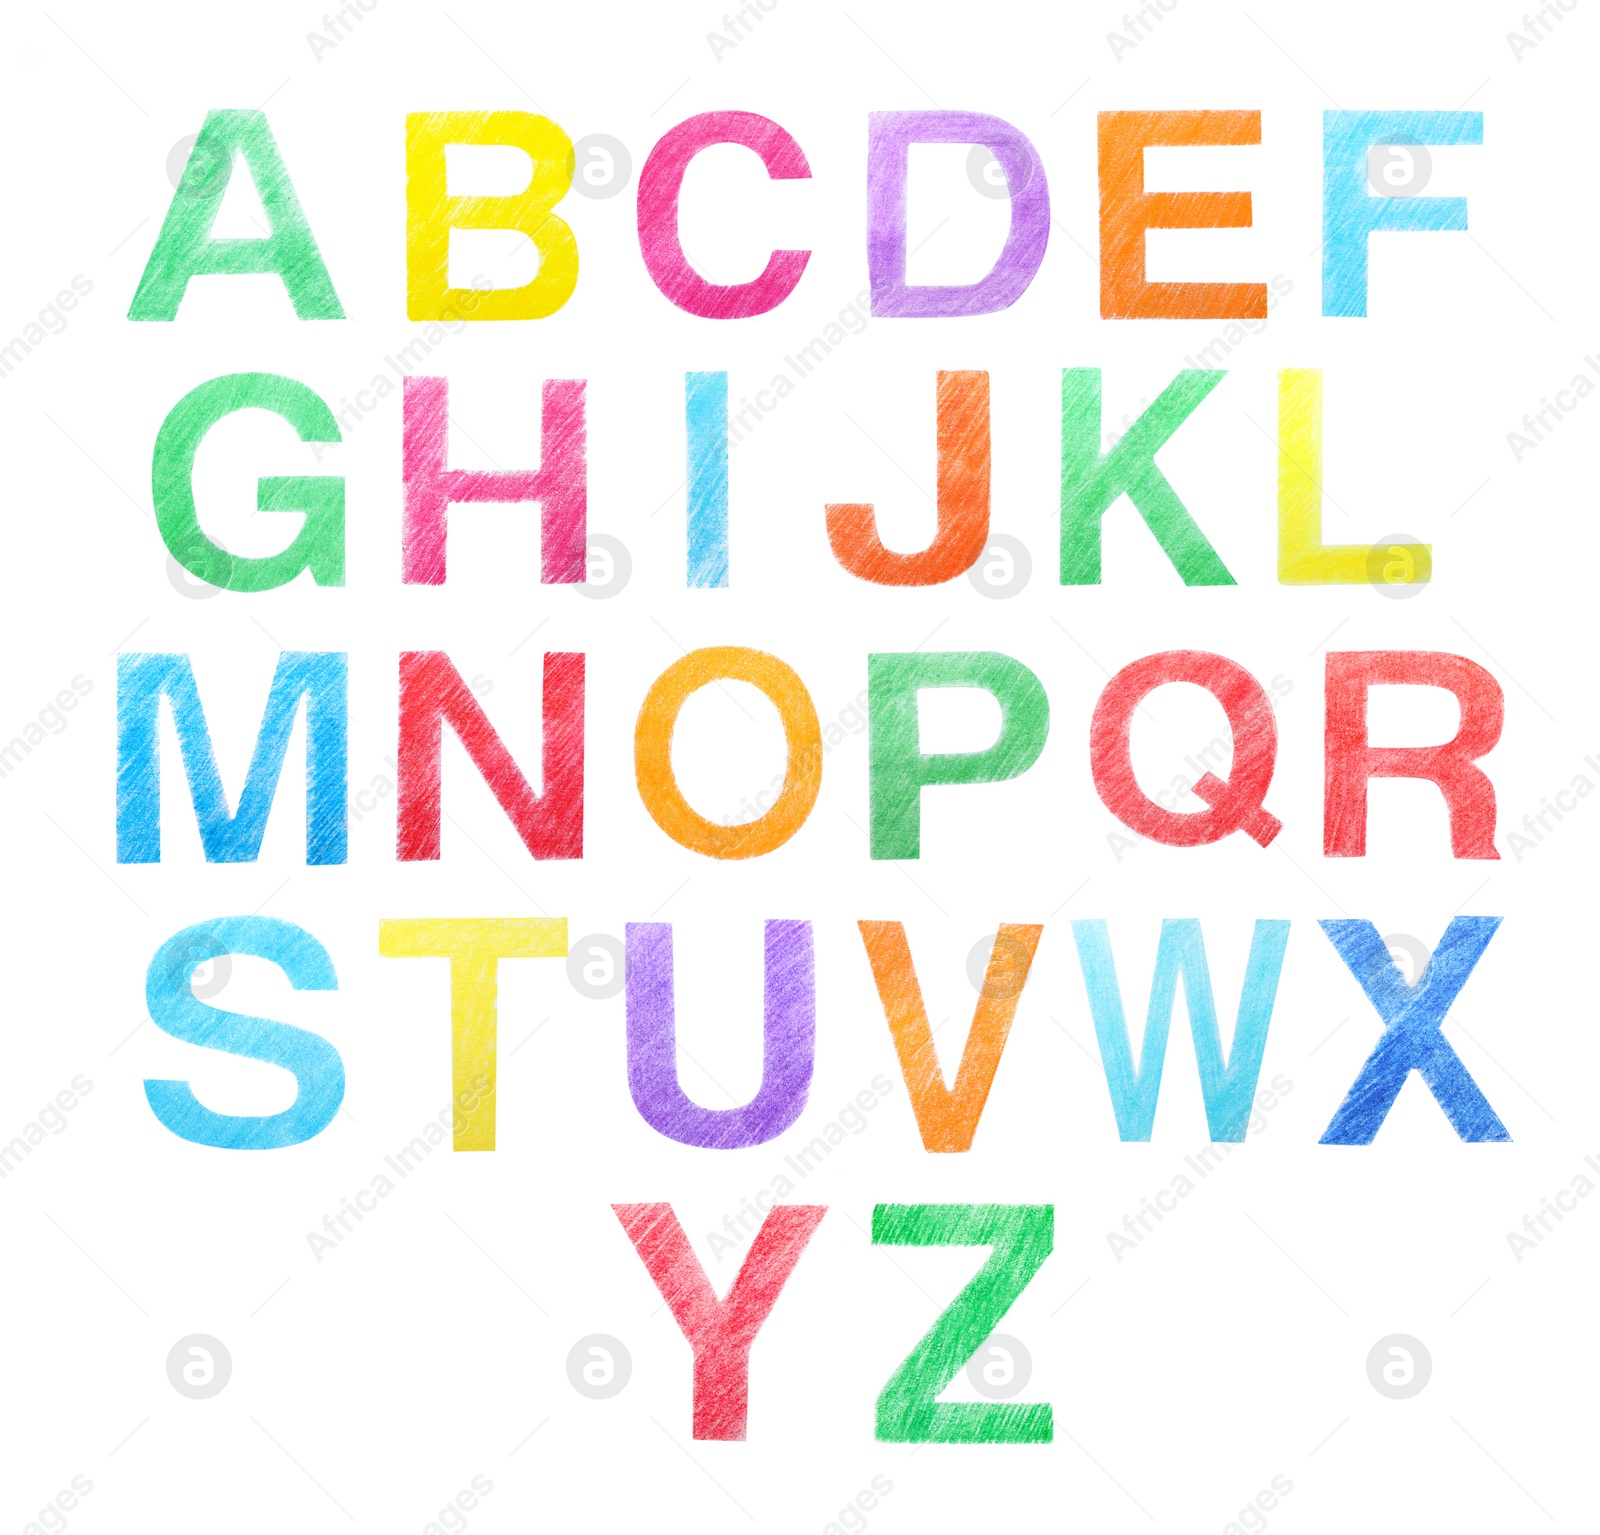 Image of Set of letters written with color pencils on white background, top view